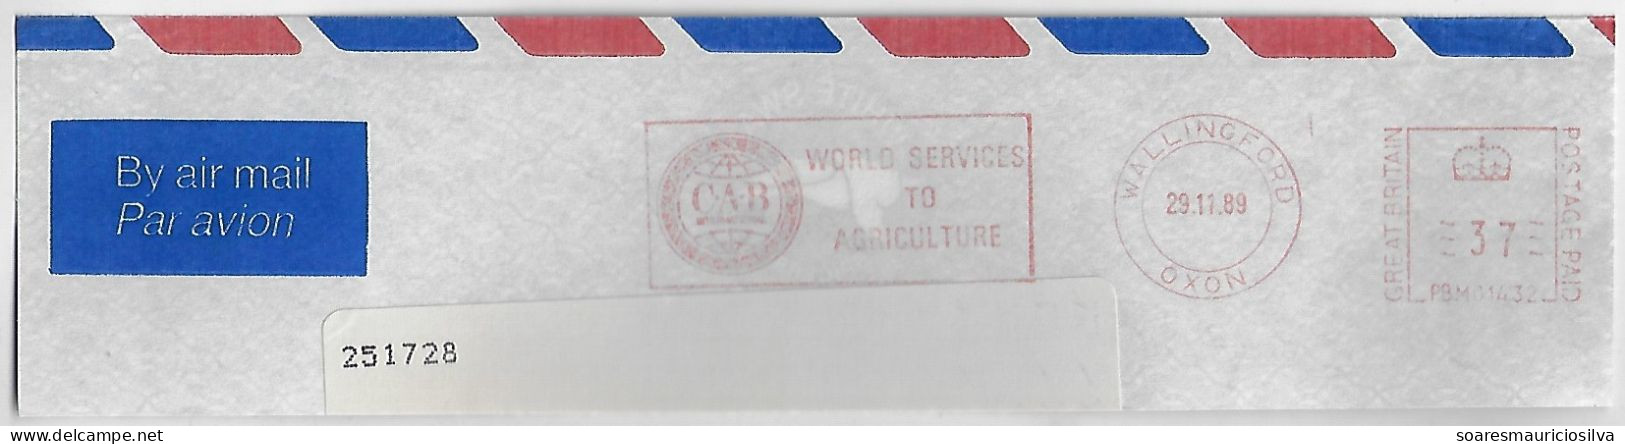 Great Britain 1989 Meter Stamp Pitney Bowes 5000 Slogan CAB International World Services To Agriculture Wallingford - Covers & Documents